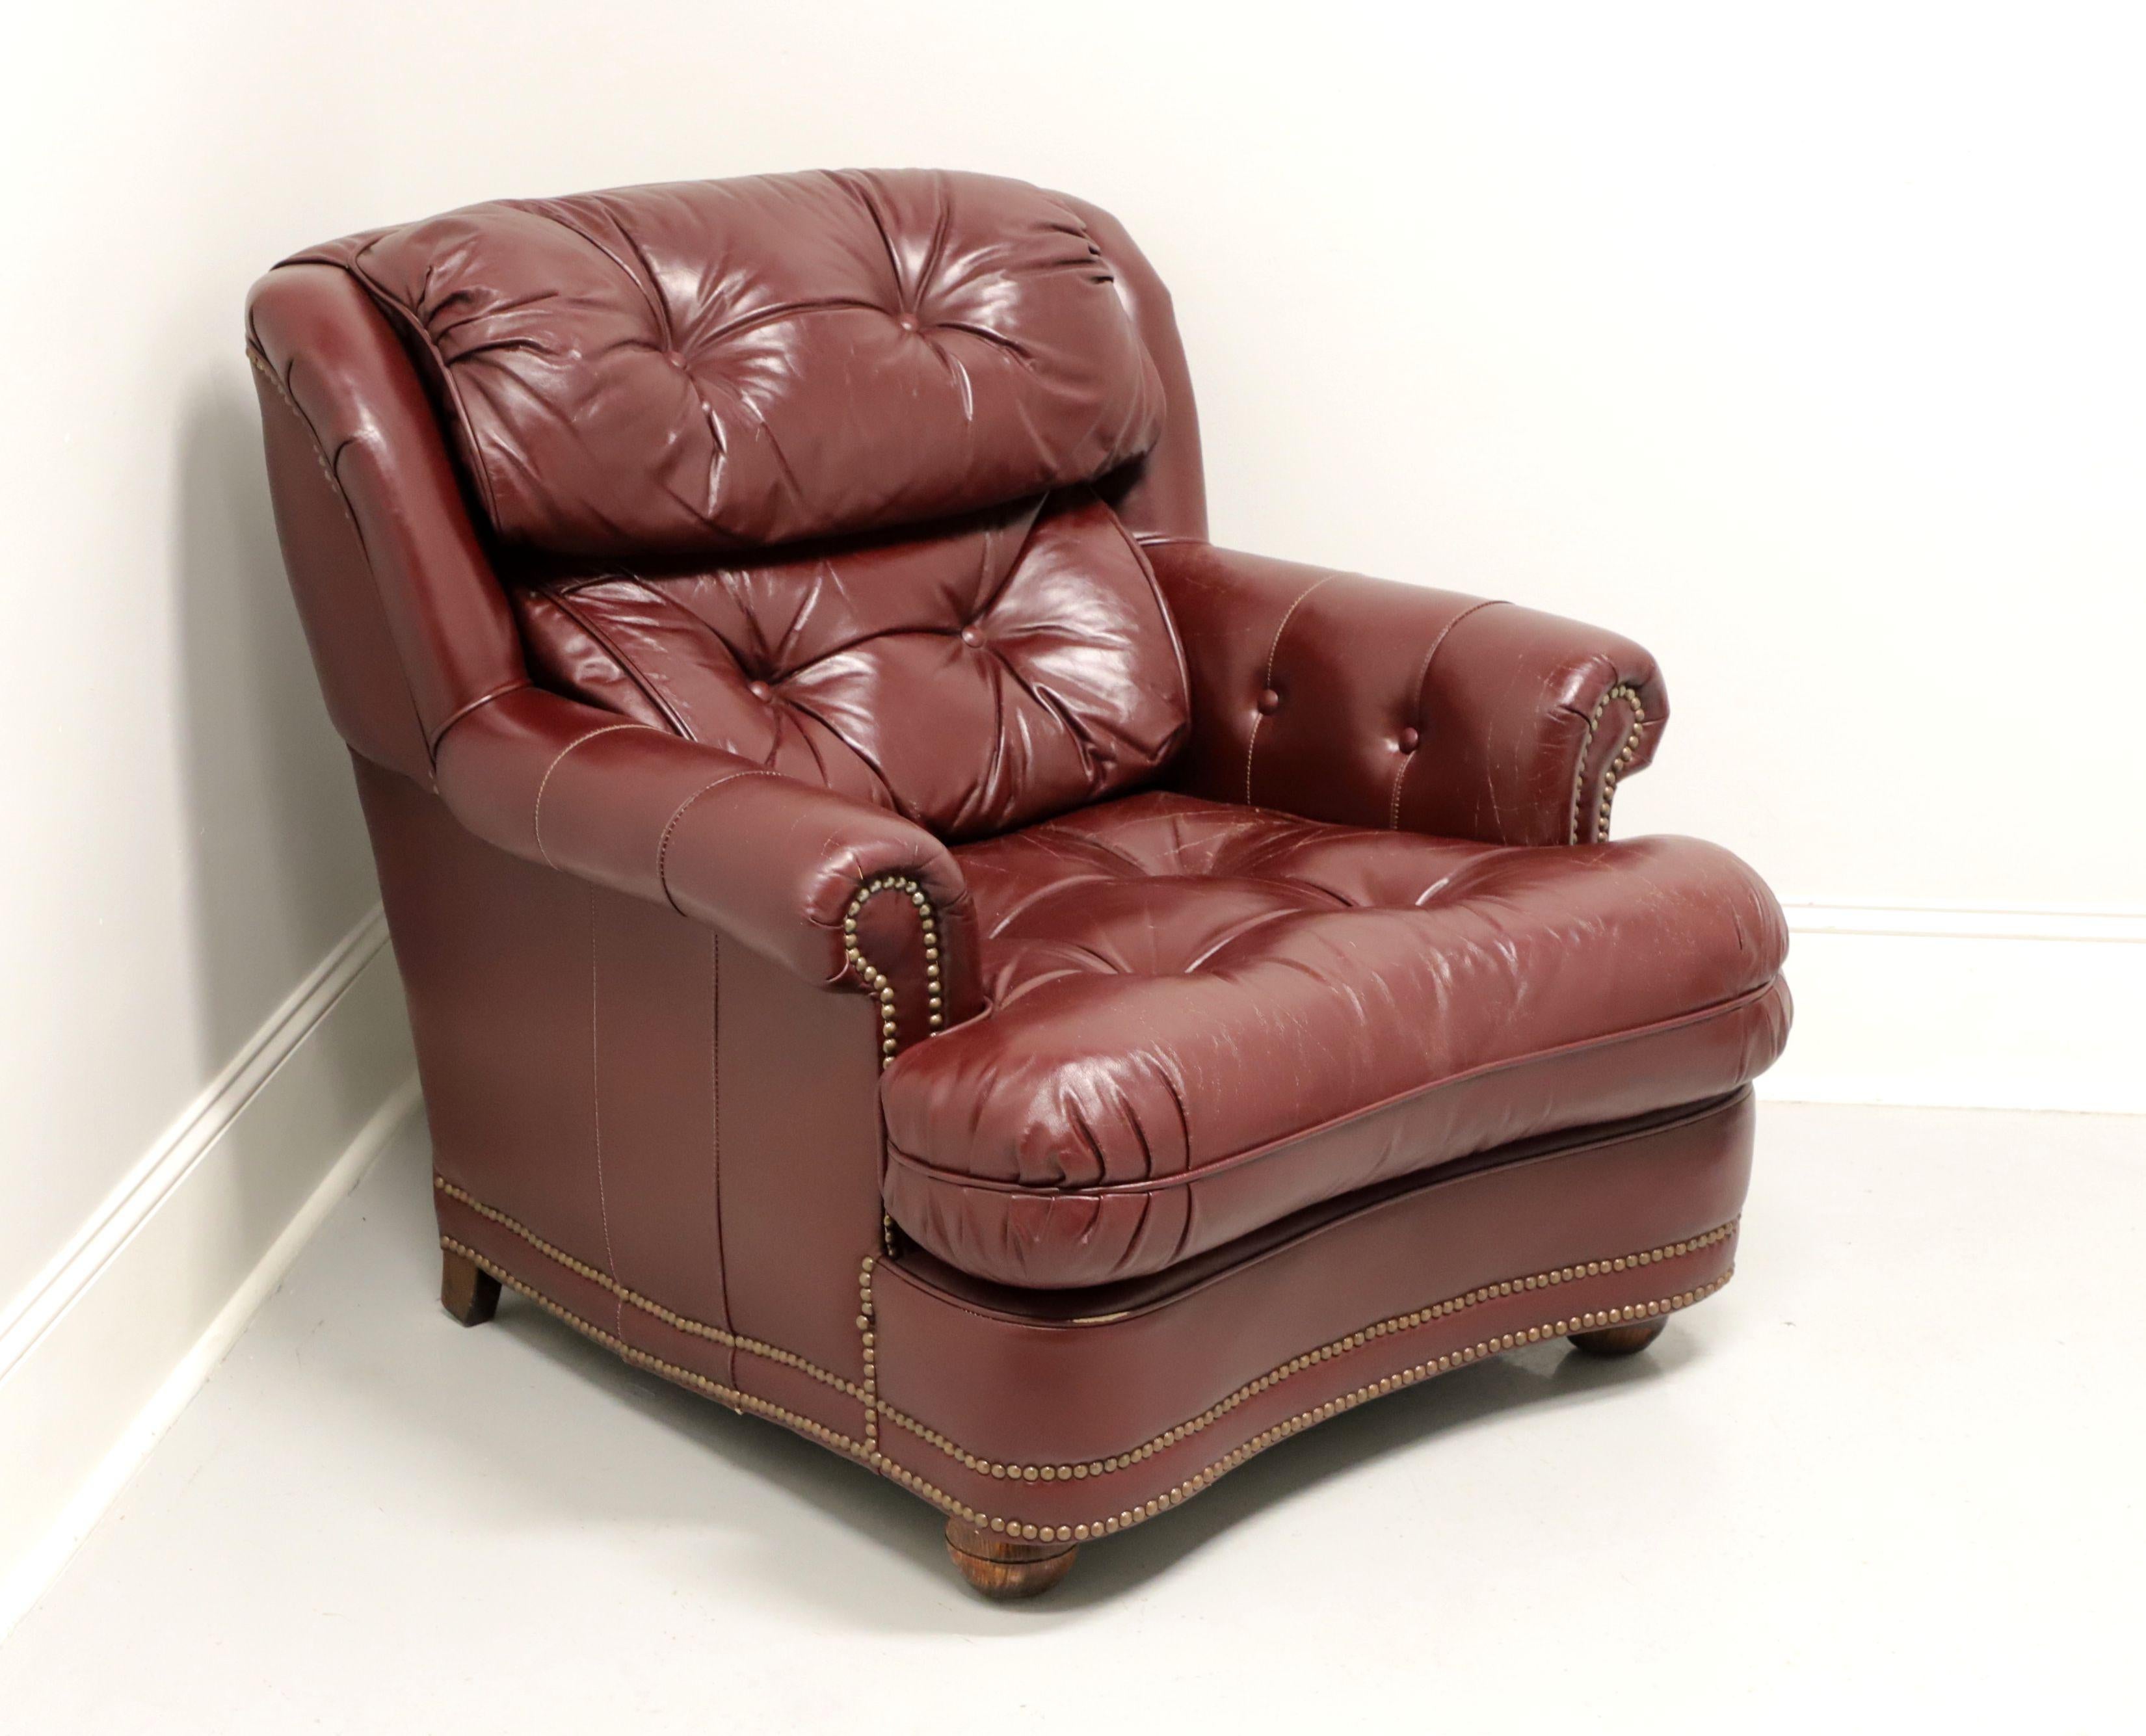 Georgian CLASSIC LEATHER Top Grain Burgundy Leather Tufted Lounge Armchair with Ottoman